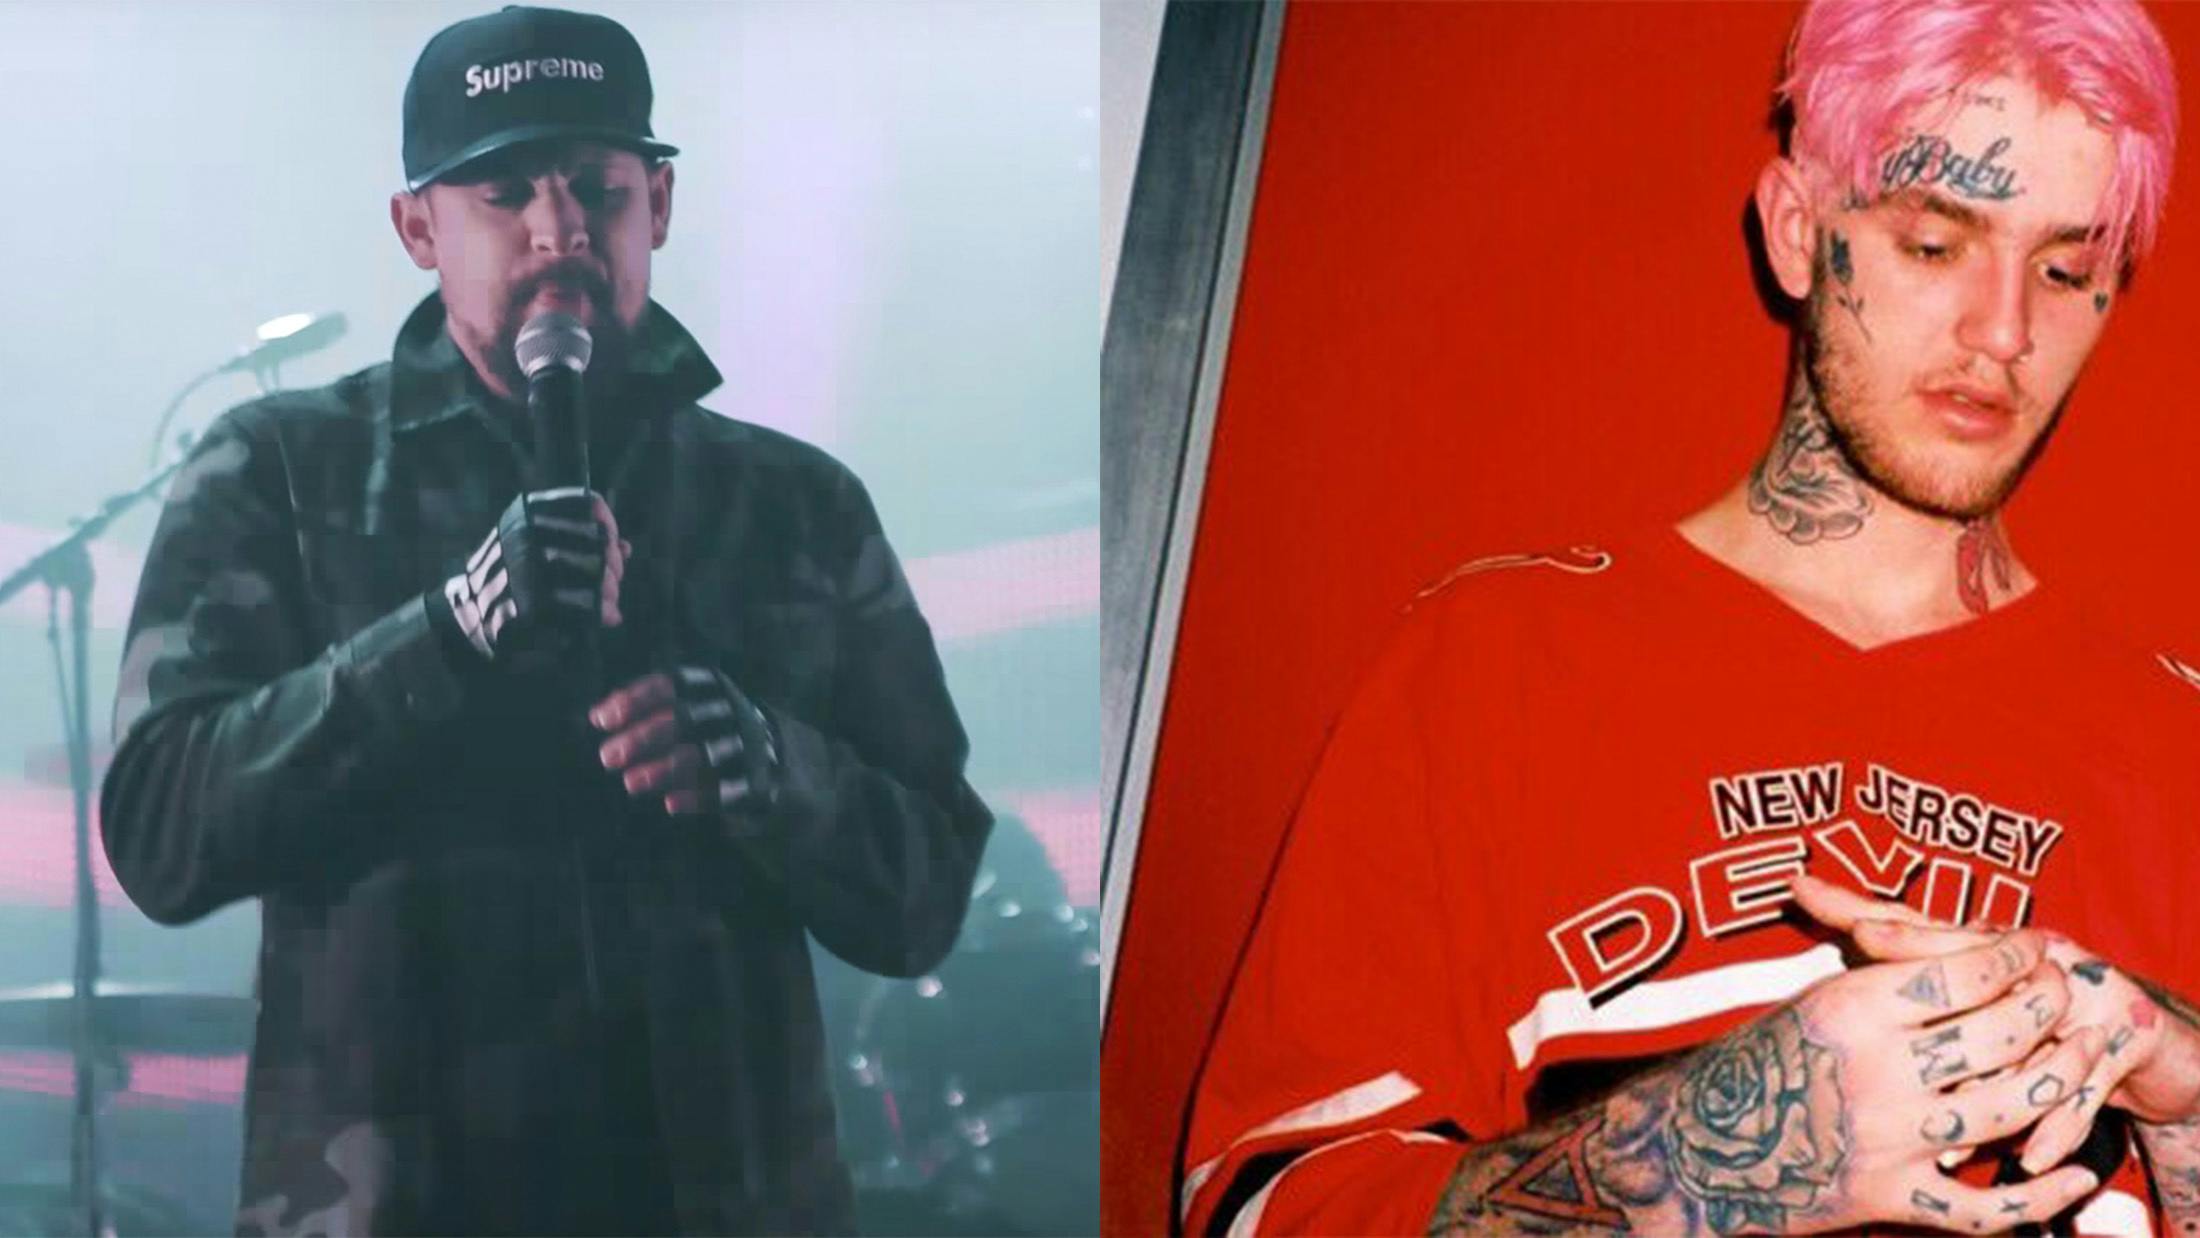 Watch Good Charlotte Cover Lil Peep As Part Of The Rapper's Memorial Service